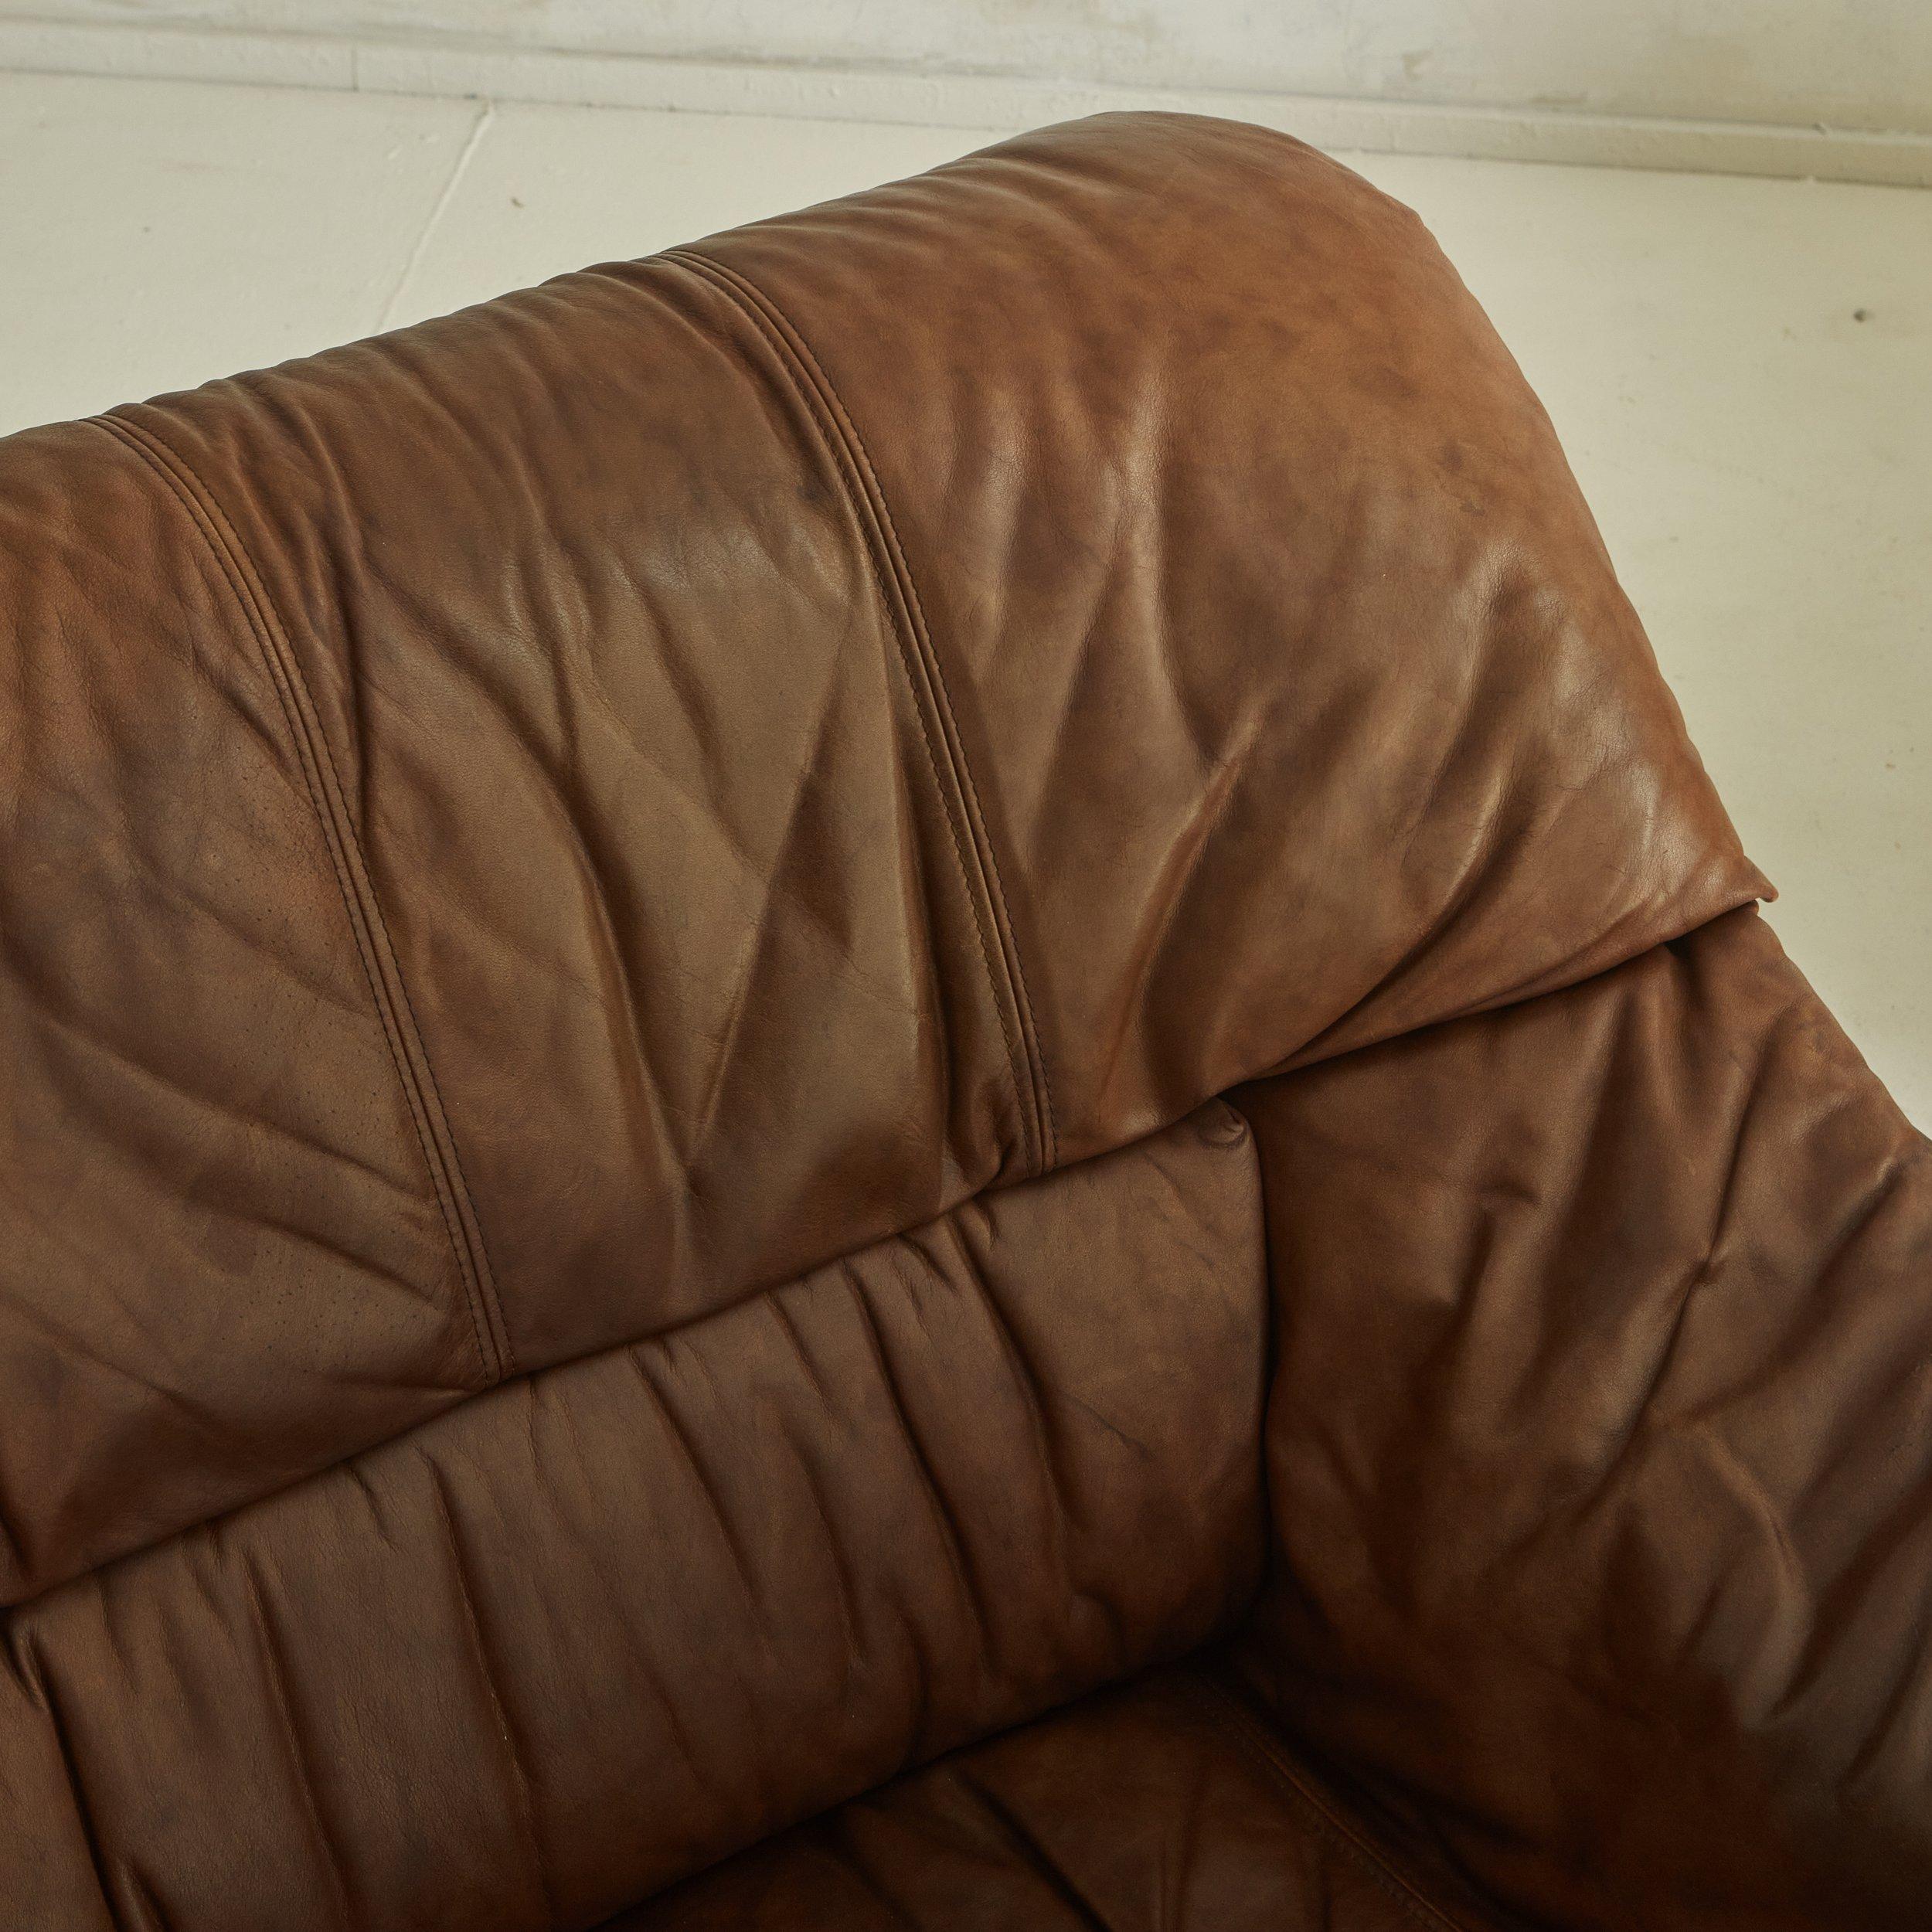 Late 20th Century Single Ruched Leather Lounge Chair in the Style of De Sede, France 1970s For Sale